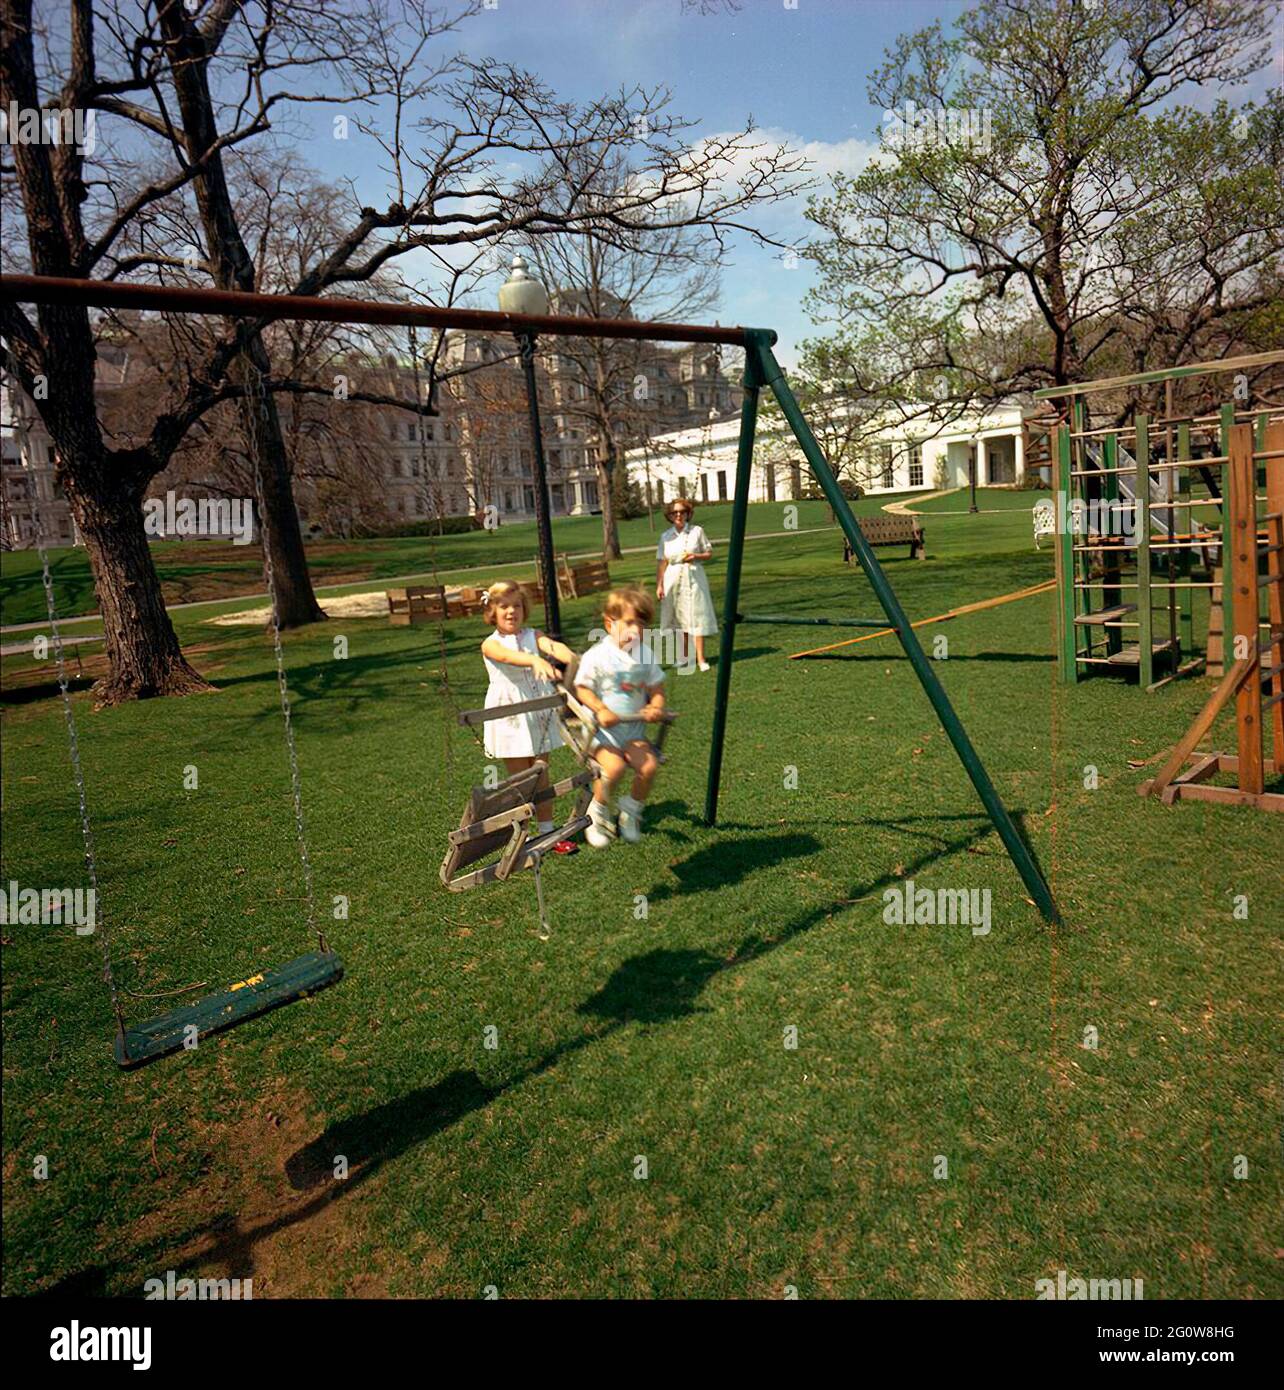 ST-C66-14-63                                                       1 April 1963  Caroline Kennedy and John F. Kennedy, Jr. playing on a swingset. South Lawn, White House, Washington, D.C.  Please credit 'Cecil Stoughton. White House Photographs. John F. Kennedy Presidential Library and Museum, Boston' Stock Photo